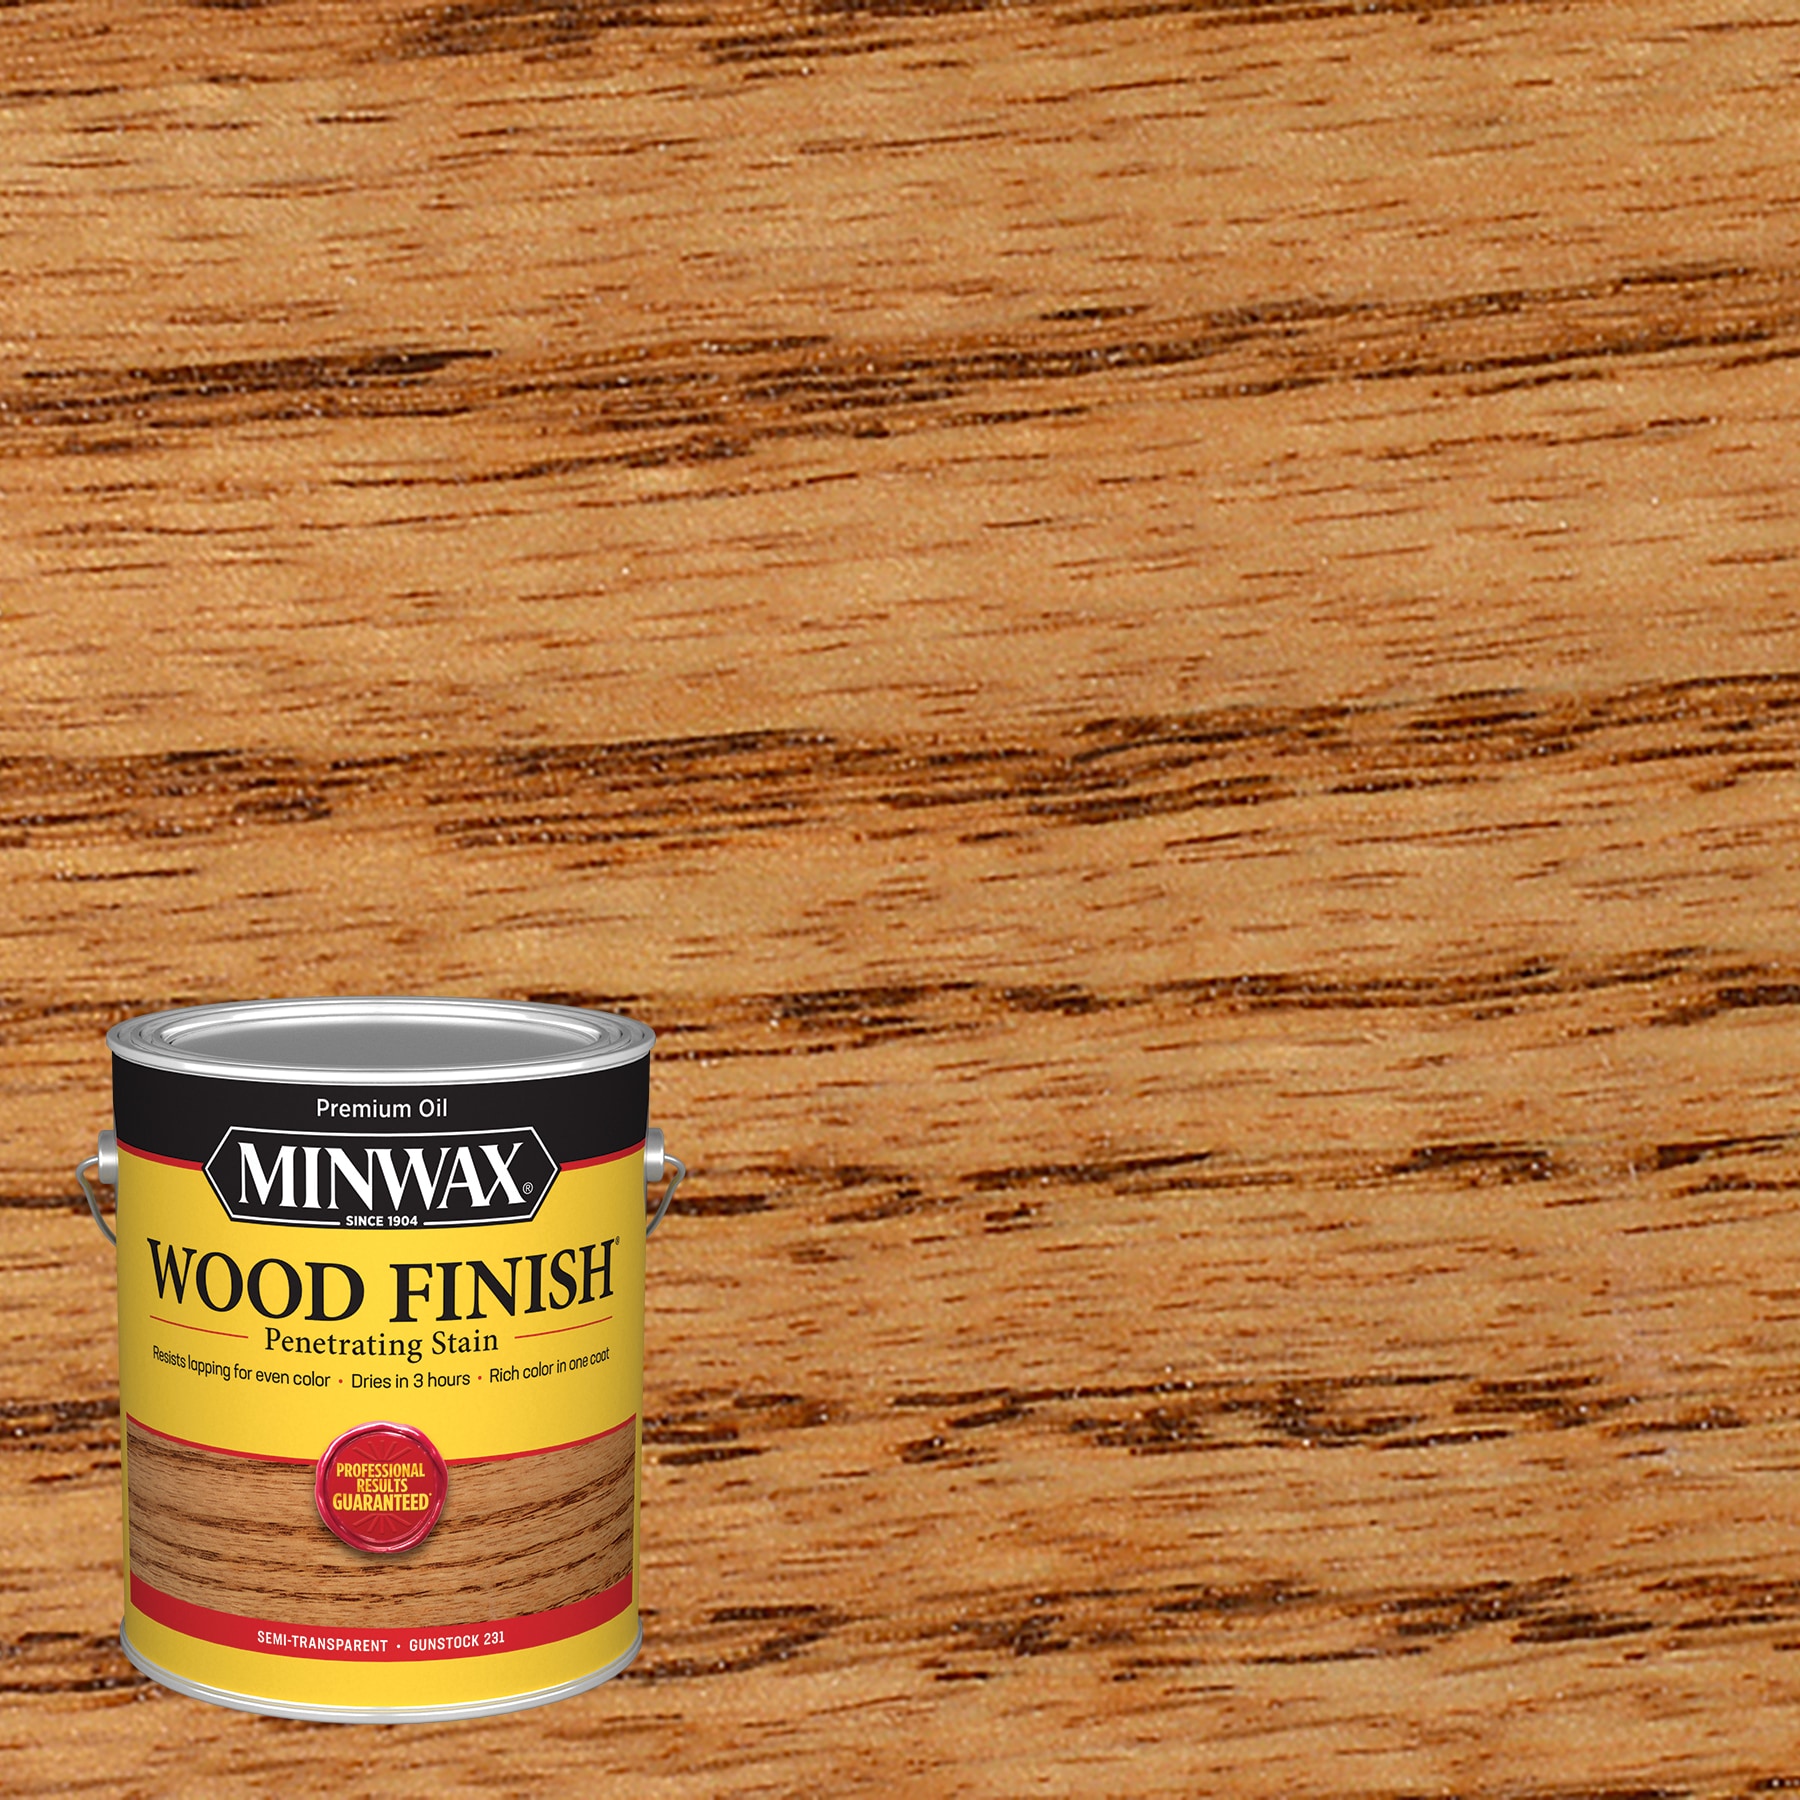 Minwax PolyShades Semi-Transparent Satin Antique Walnut Oil-Based Stain 1  qt. - Total Qty: 1, Count of: 1 - Foods Co.